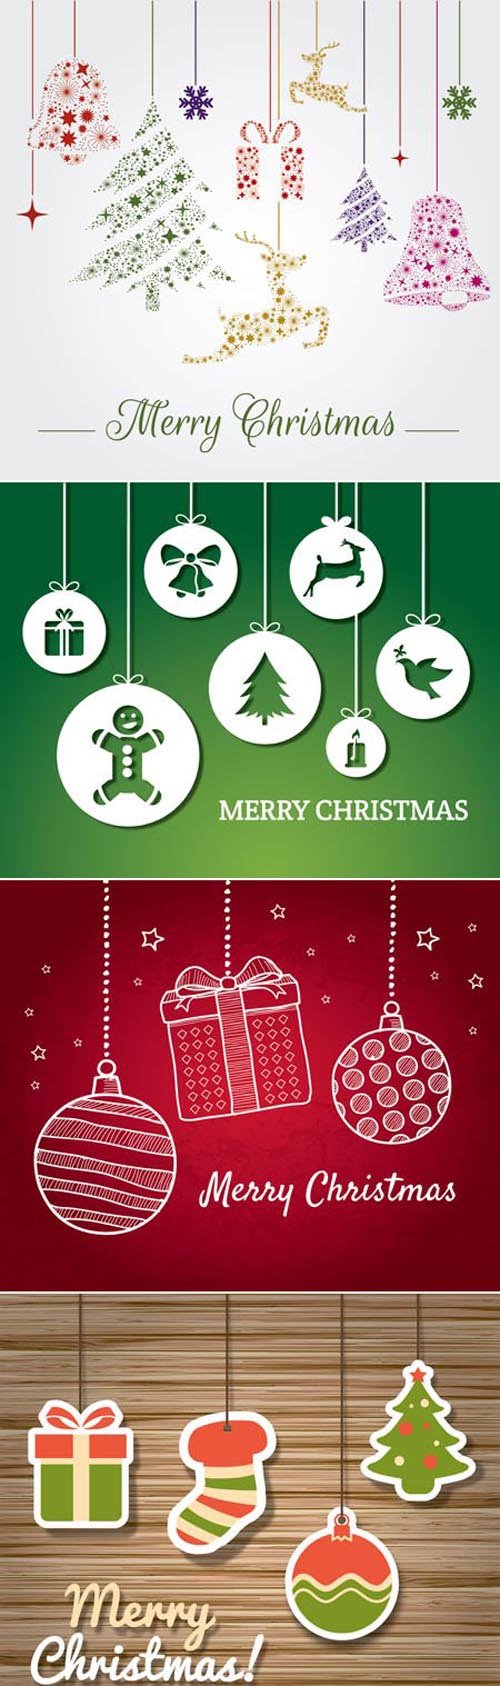 Merry Christmas Hanging Ornaments Background in Vector